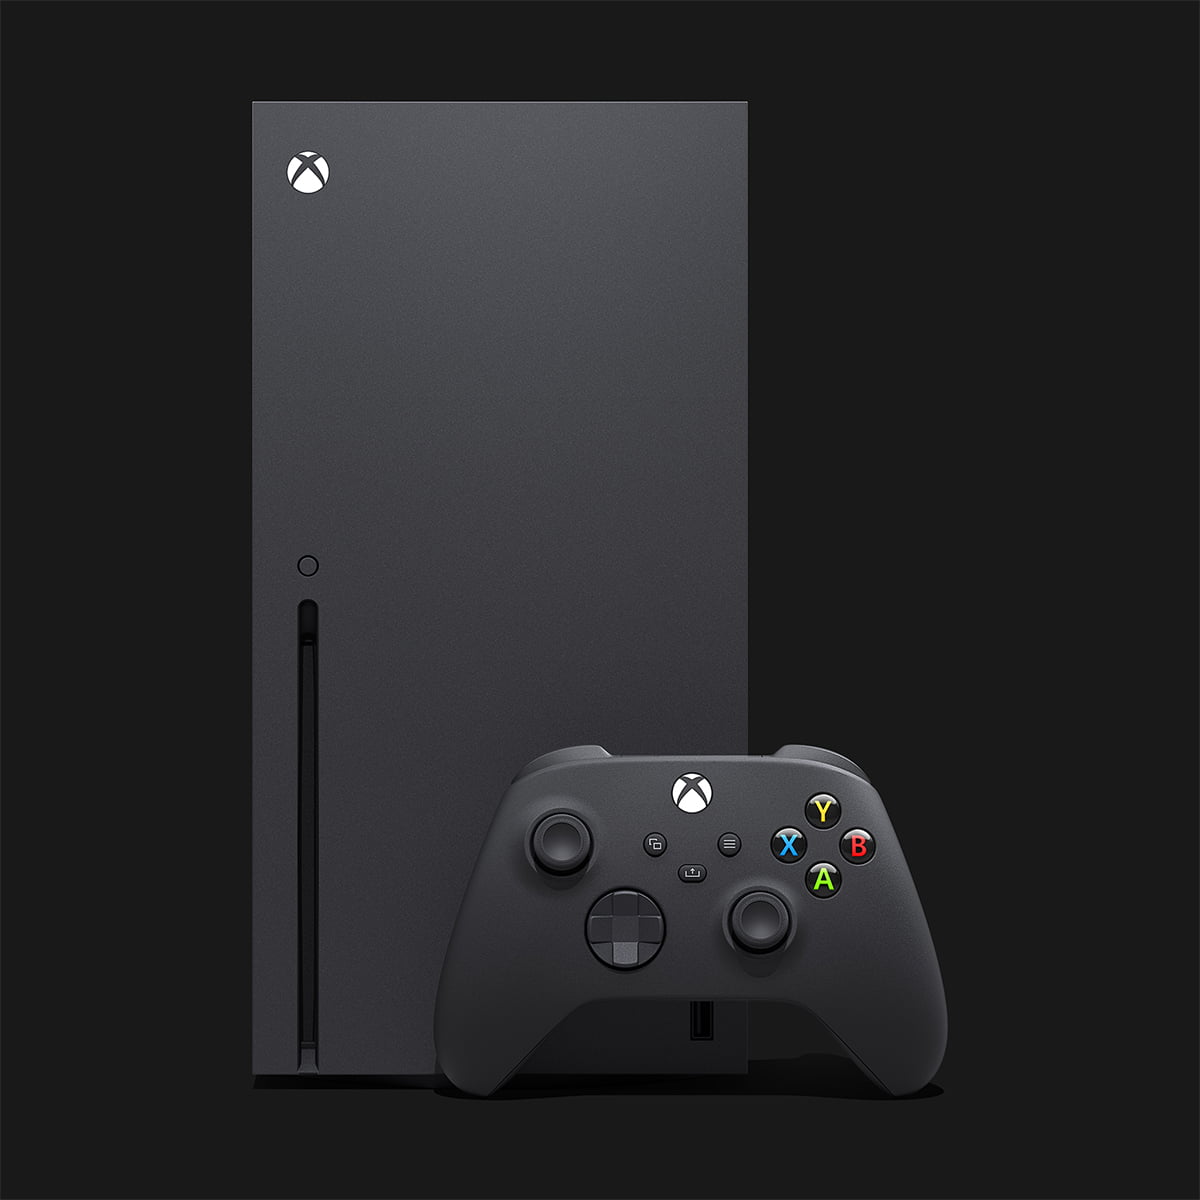 Xbox Series X Video Game Console, Black + Free Shipping $499